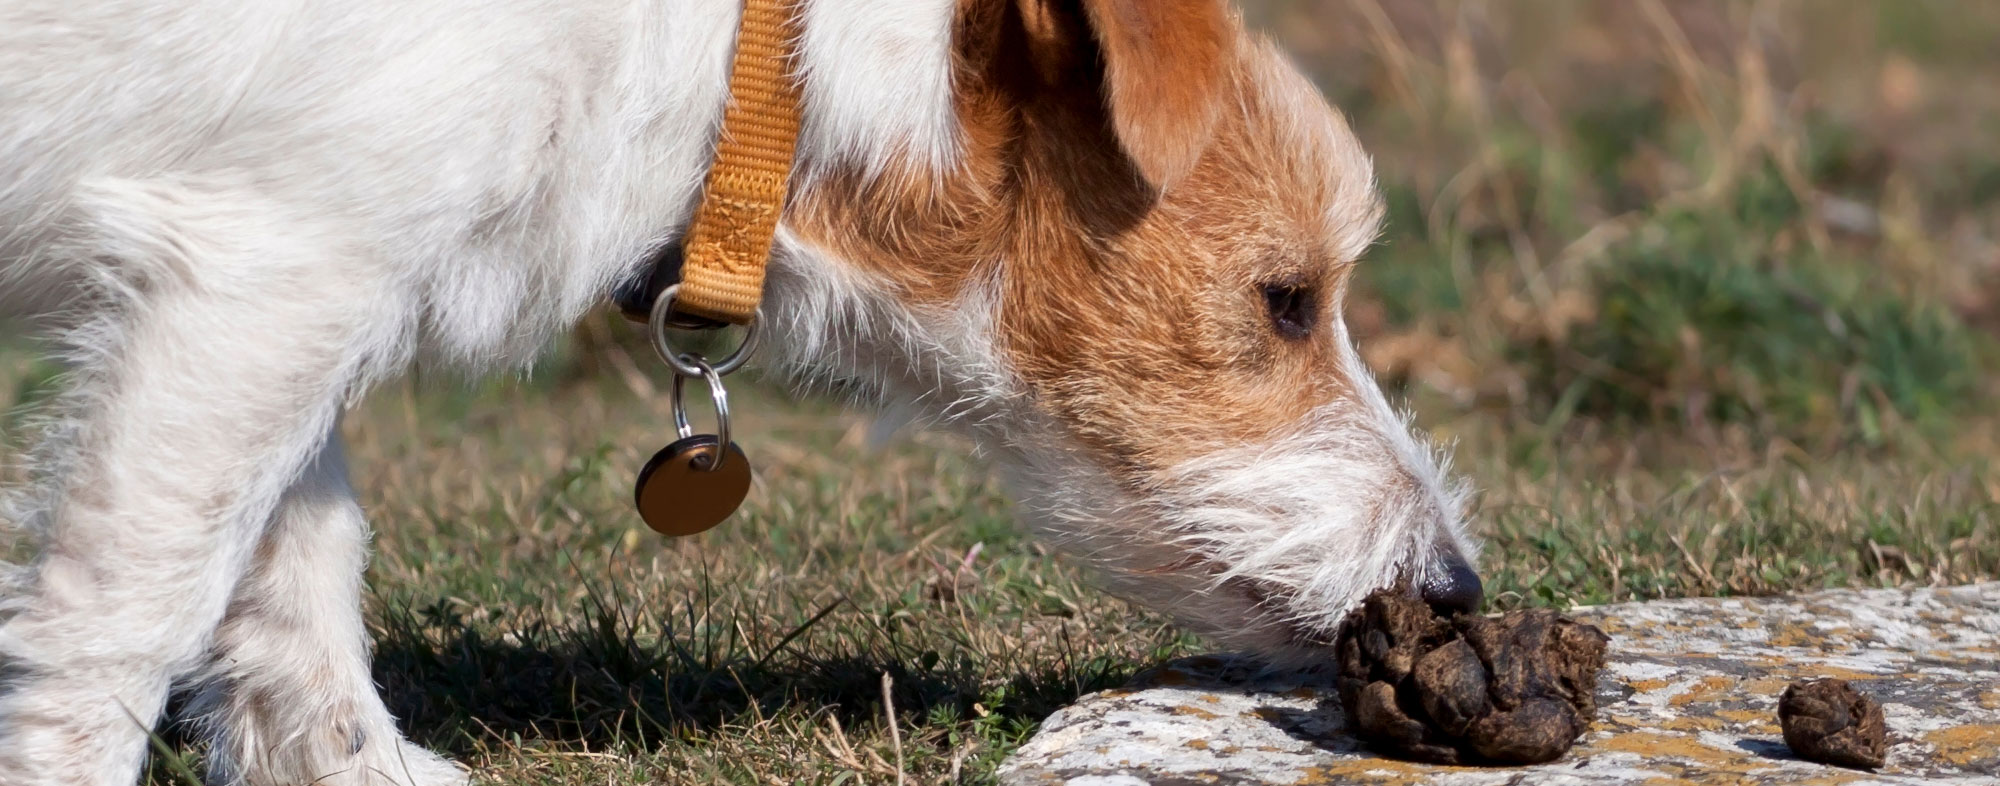 what causes a dog to eat its own poop